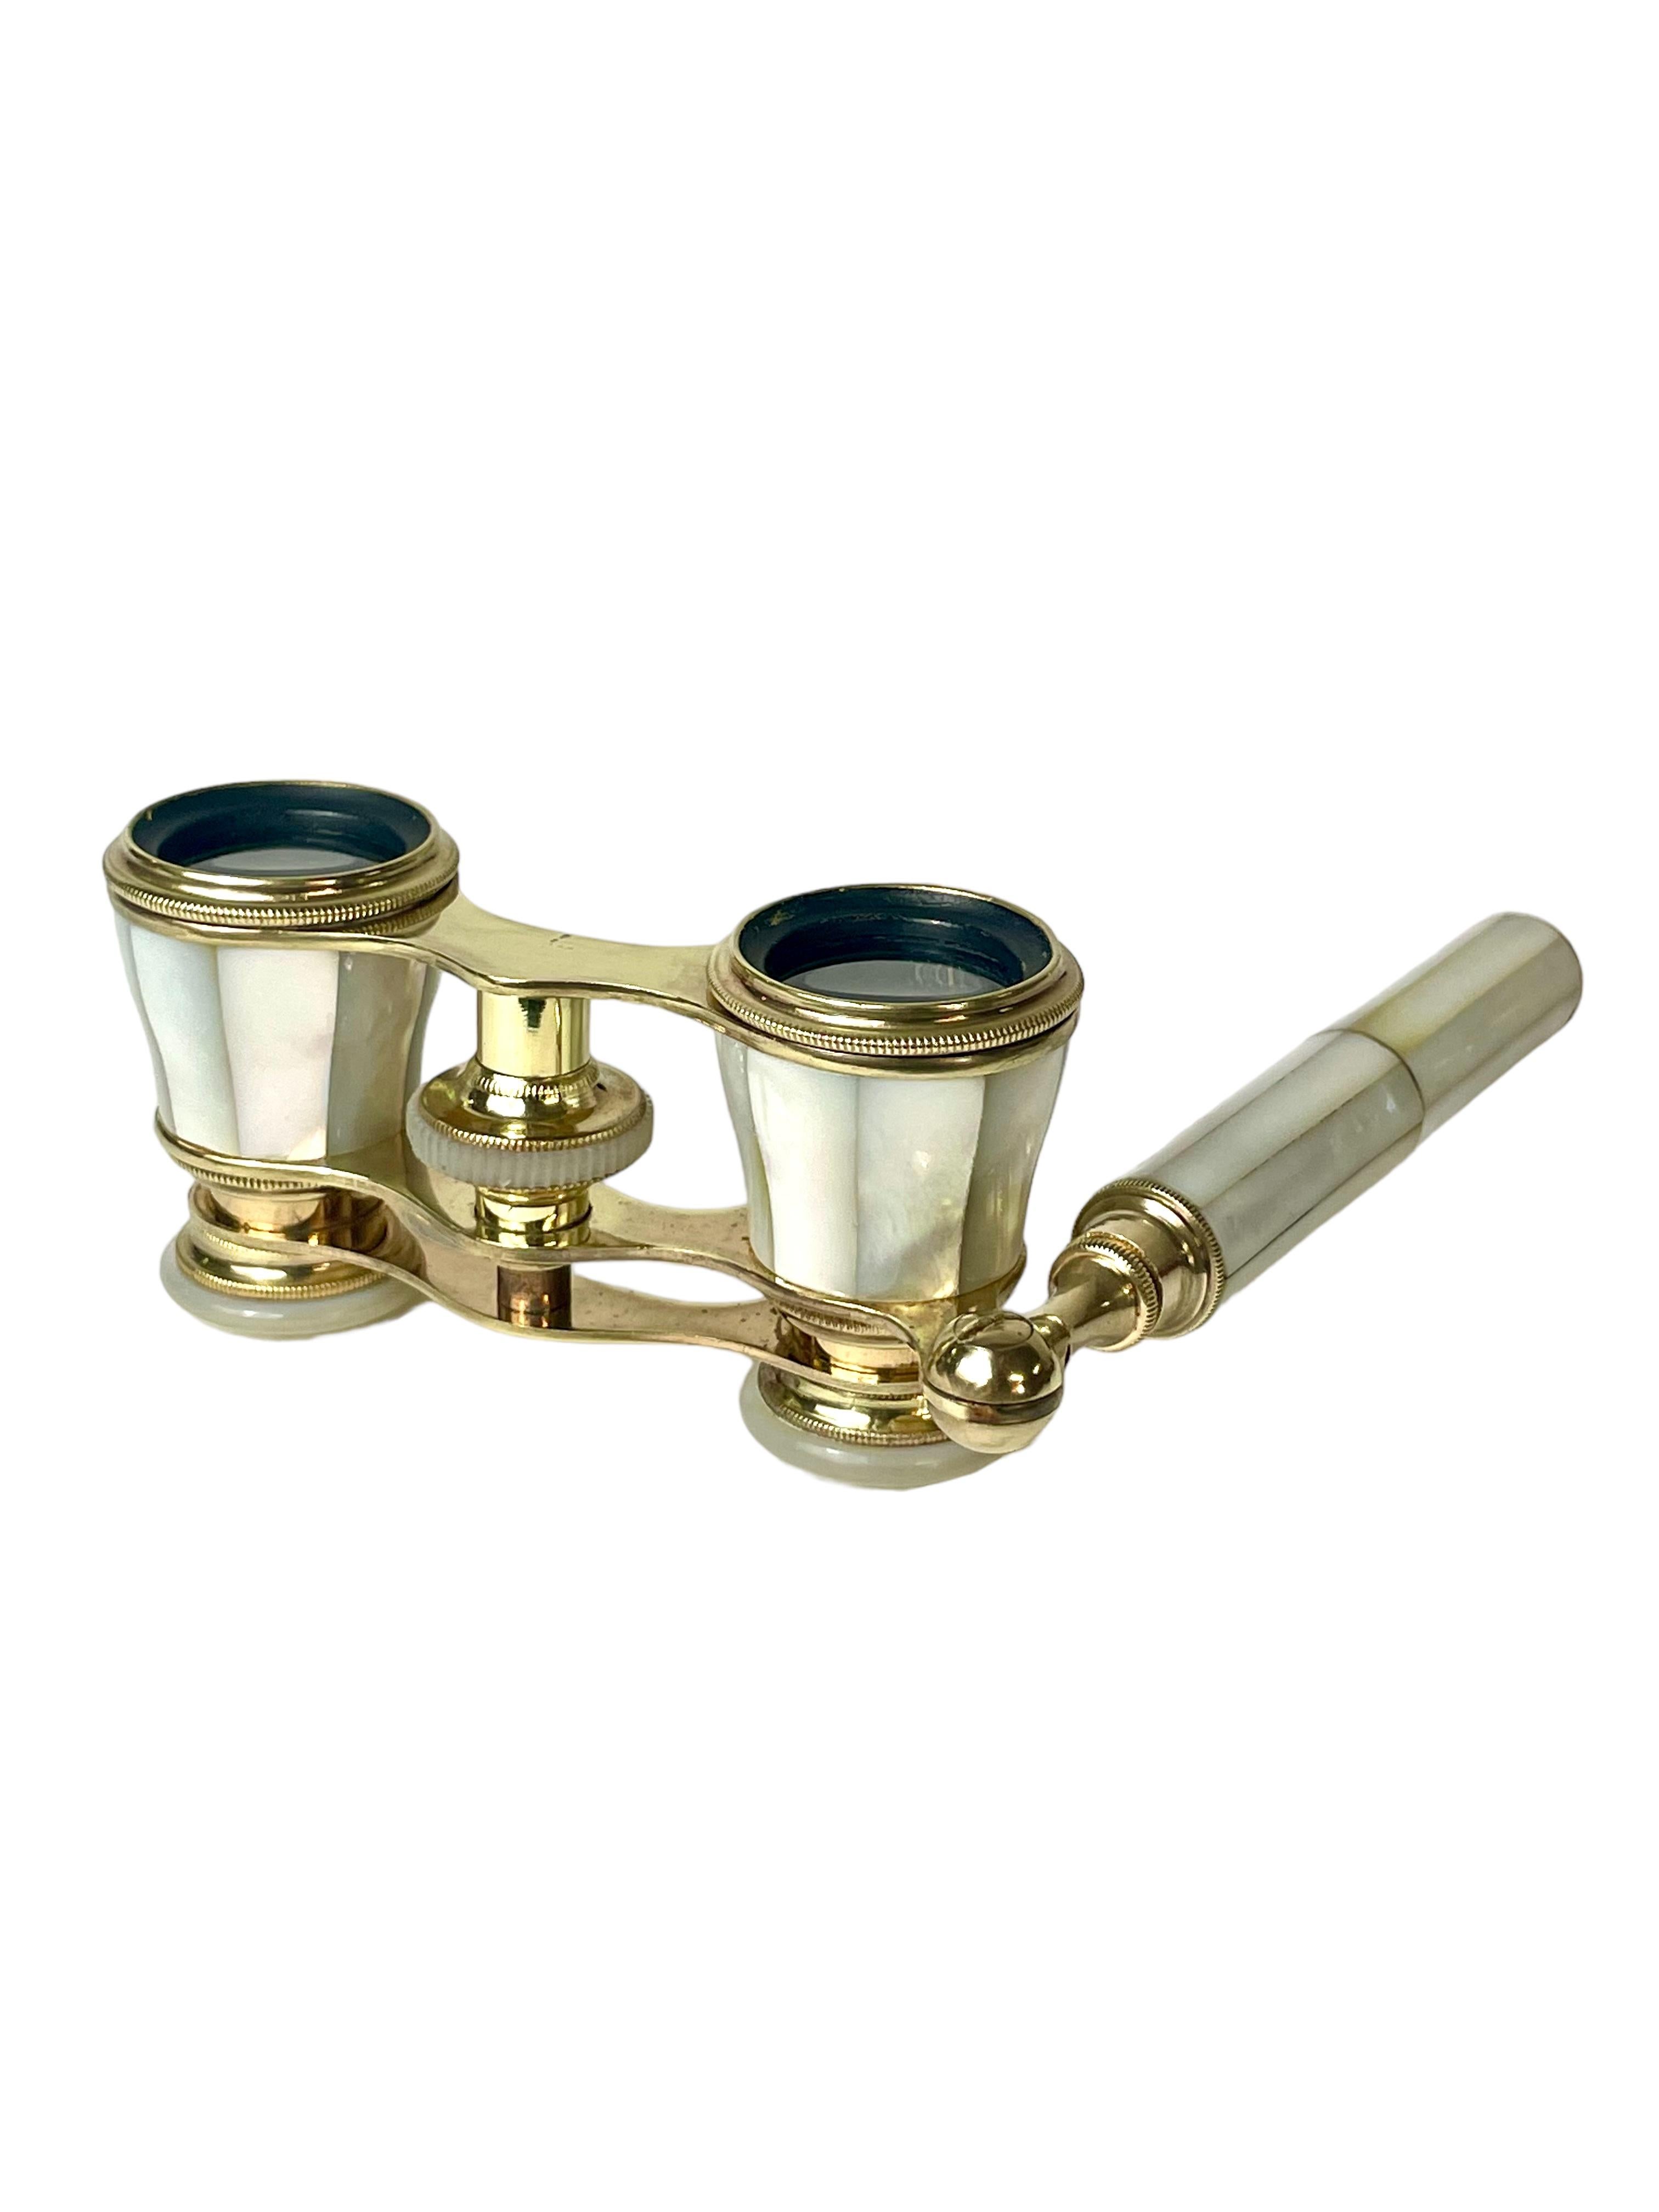 French Brass and Mother of Pearl Lorgnettes 'Long-Handled Opera Glasses'